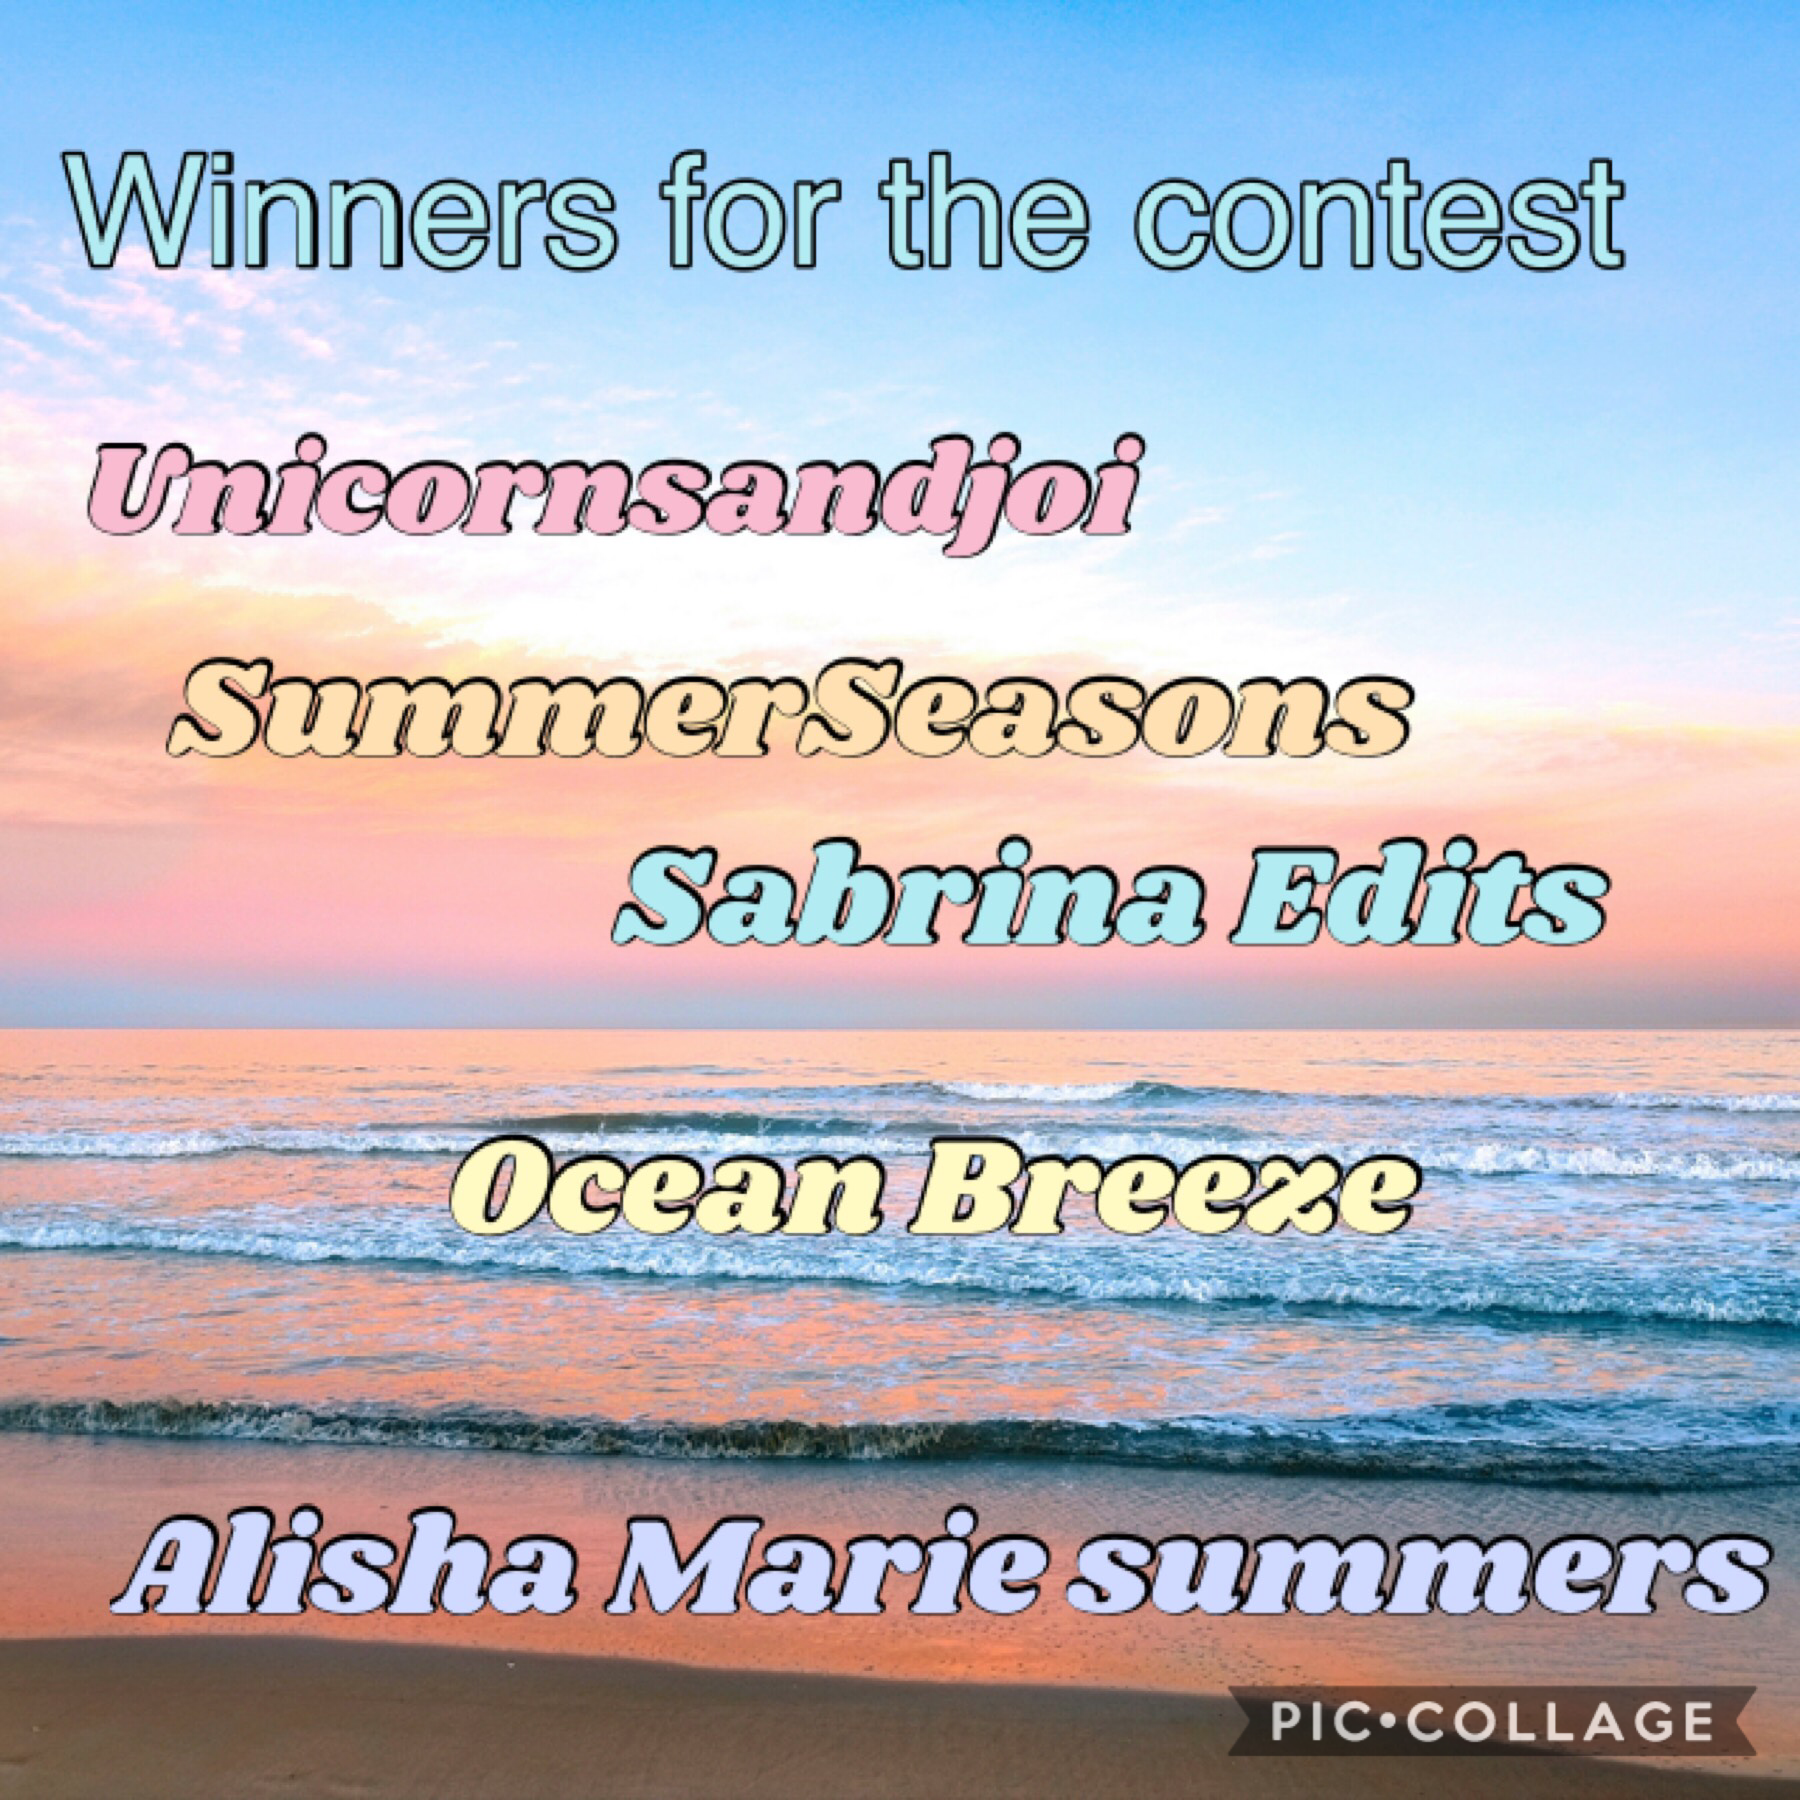 Winners for the contest